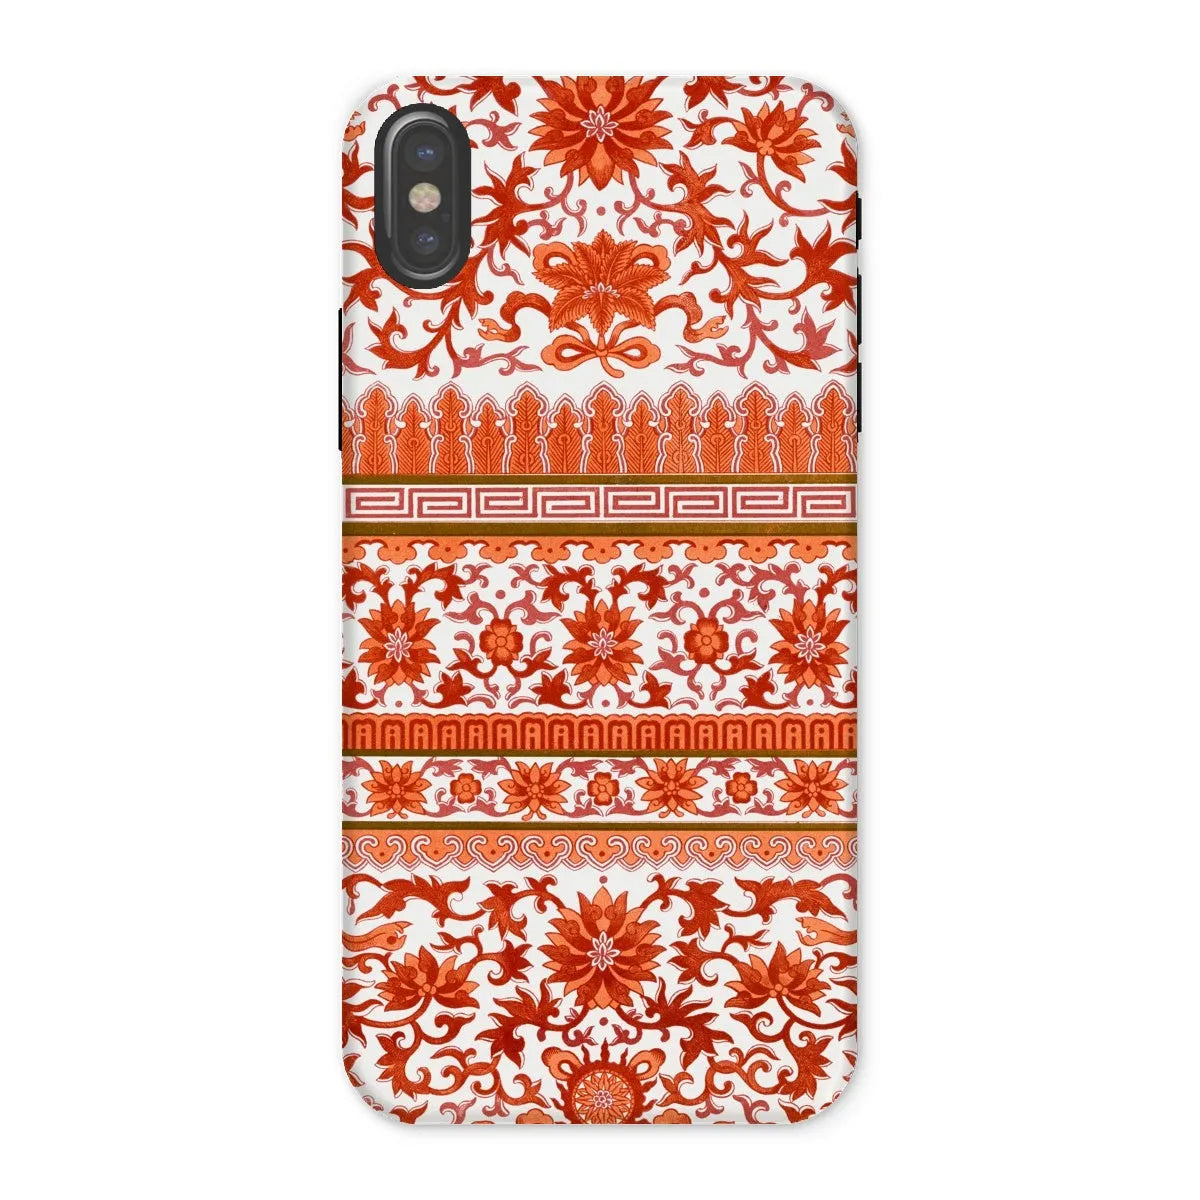 Fiery Chinese Floral Aesthetic Art Phone Case - Owen Jones - Iphone x / Matte - Mobile Phone Cases - Aesthetic Art